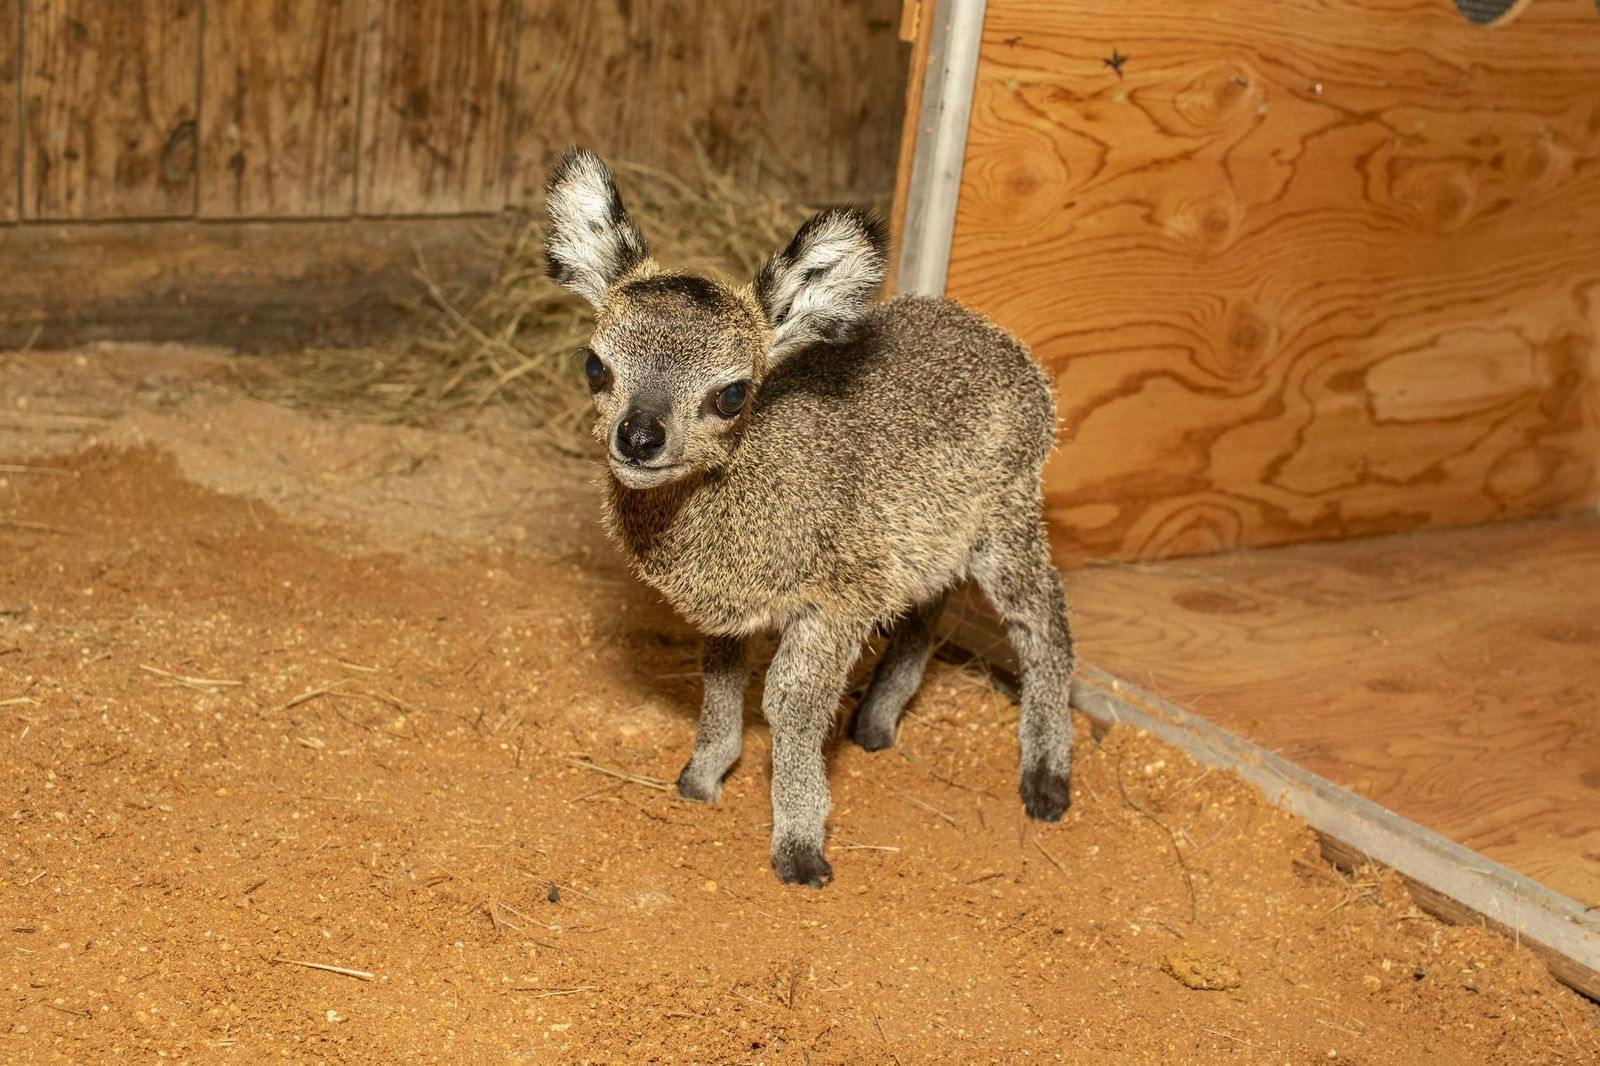 Meet the newest member of the Brevard Zoo family: A pint-sized klipspringer calf